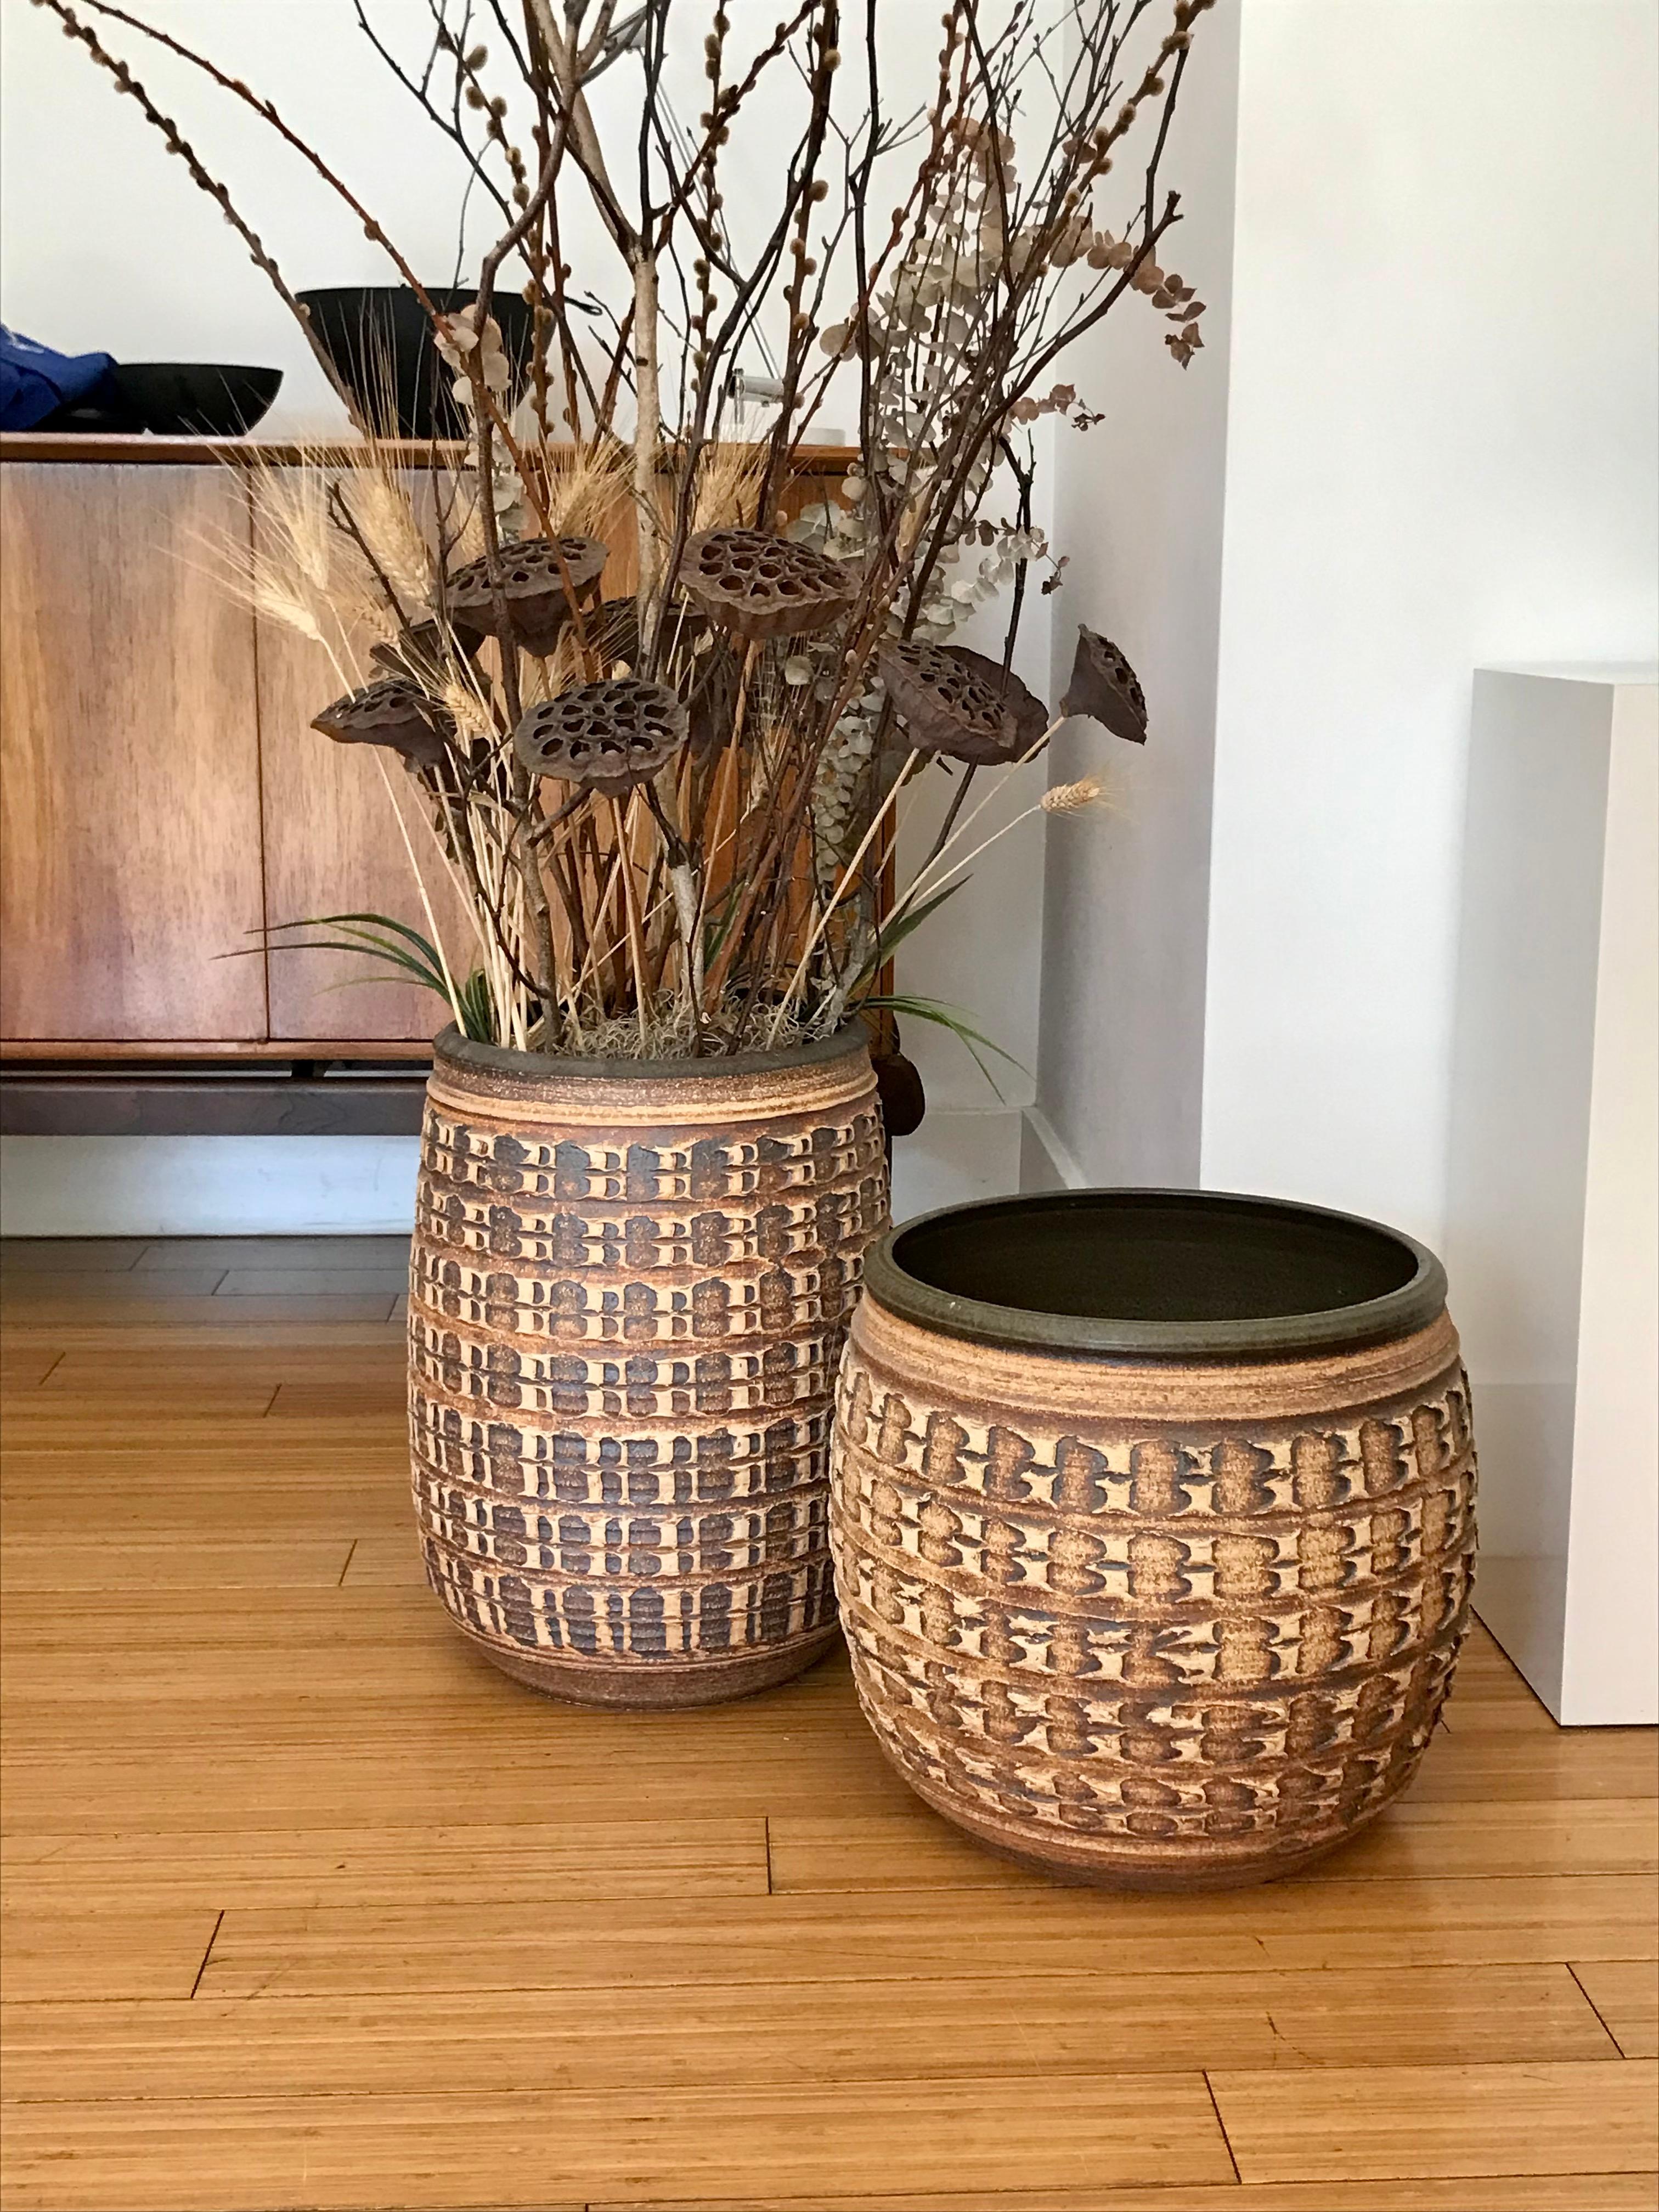 Handsome pair of 'Affiliated Craftsman' California design planters.
Wheel thrown natural clay on the outside with hand tooled pattern design, and glazed on the inside.
No drain holes.
No cracks, chips nor repairs.
Great original condition.
The